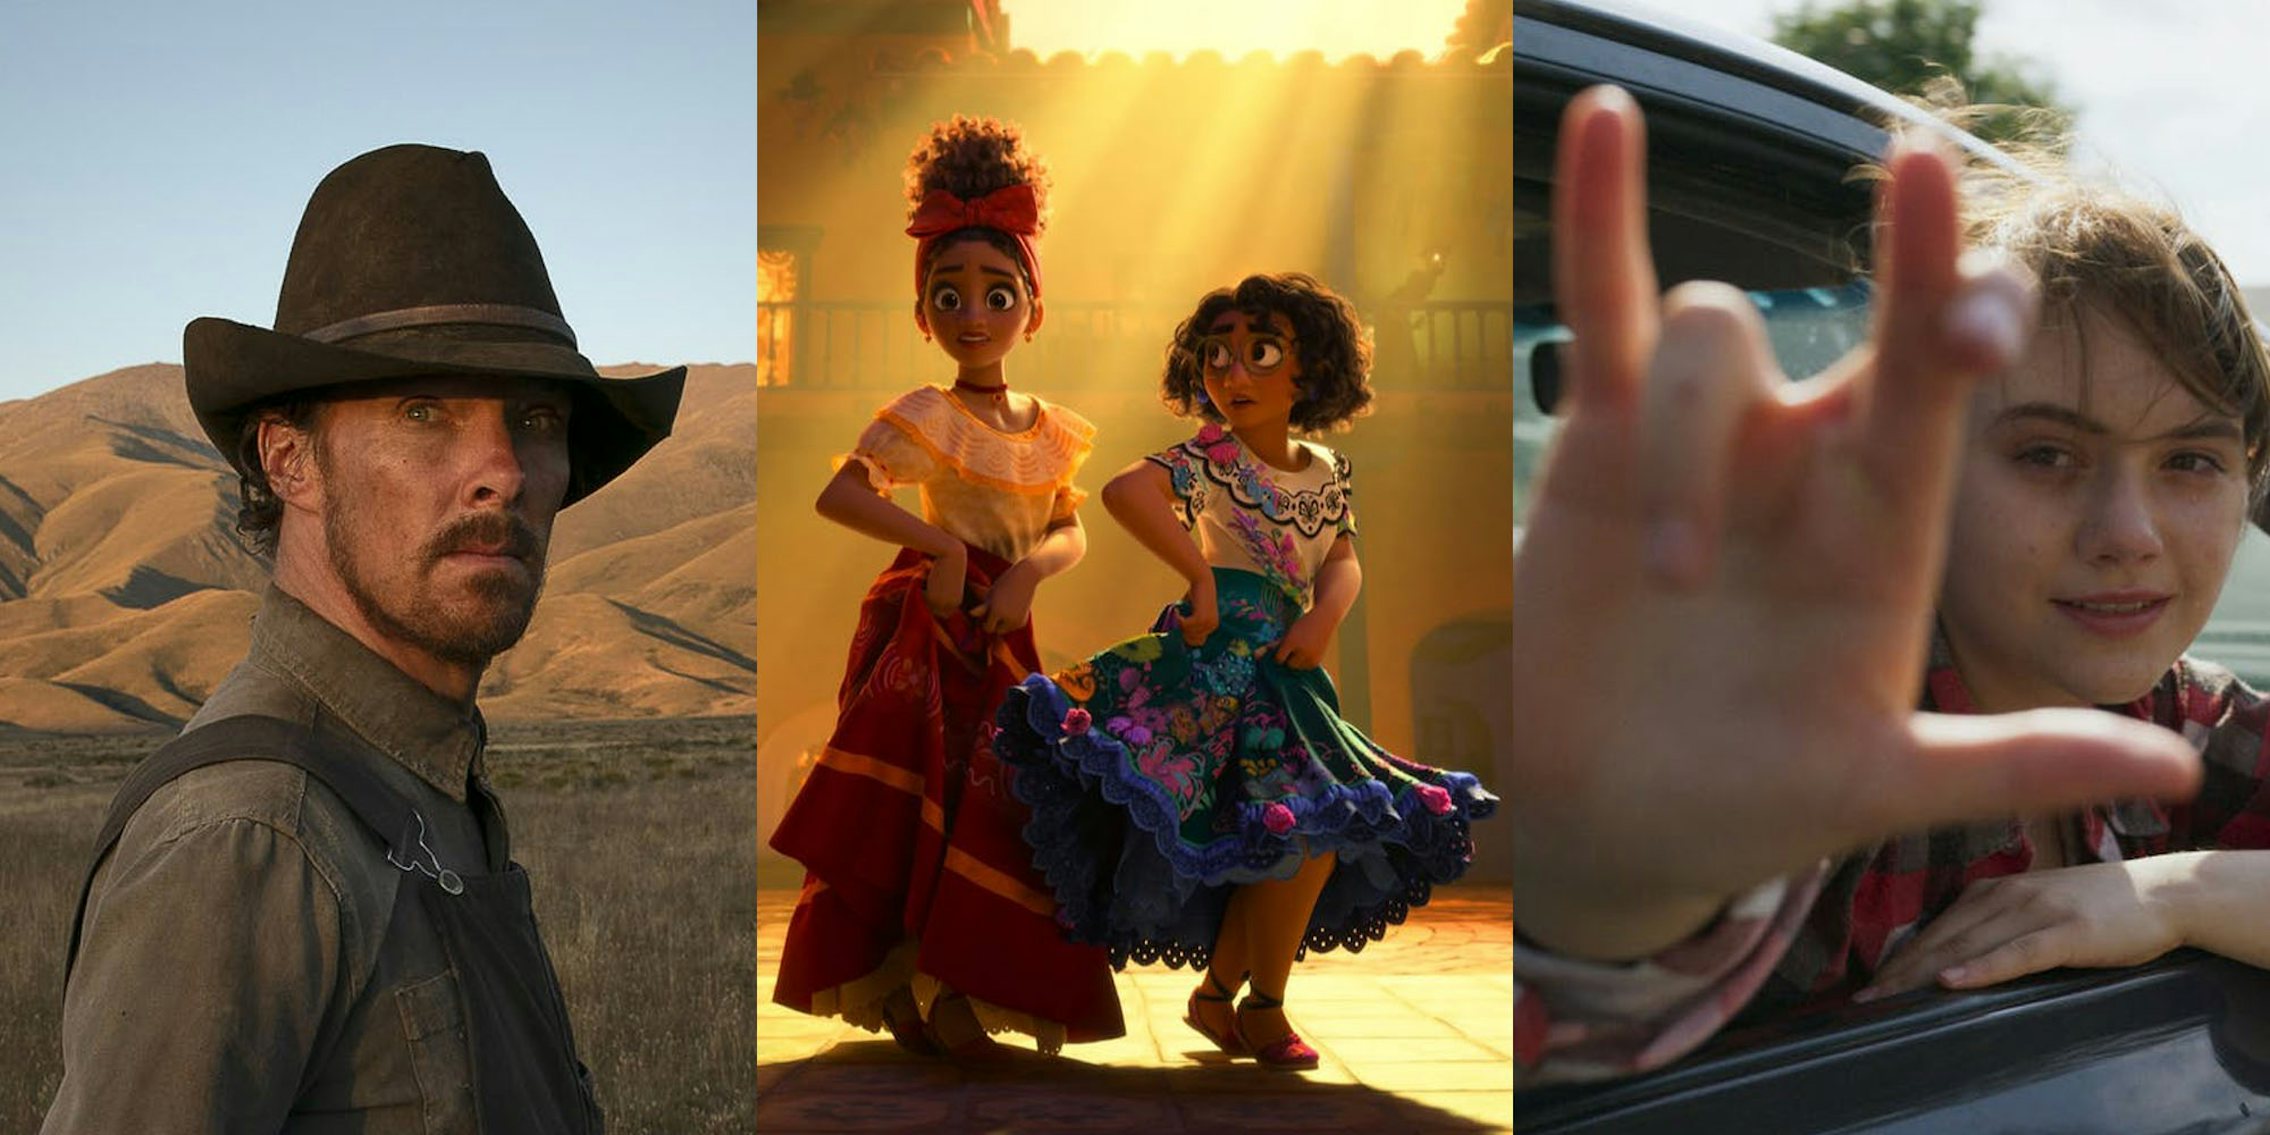 The Power of the Dogs Benedict Cumberbatch in cowboy hat (l) Encanto two women dancing in dresses (c) CODA person with hand making sign out of a car window (r)